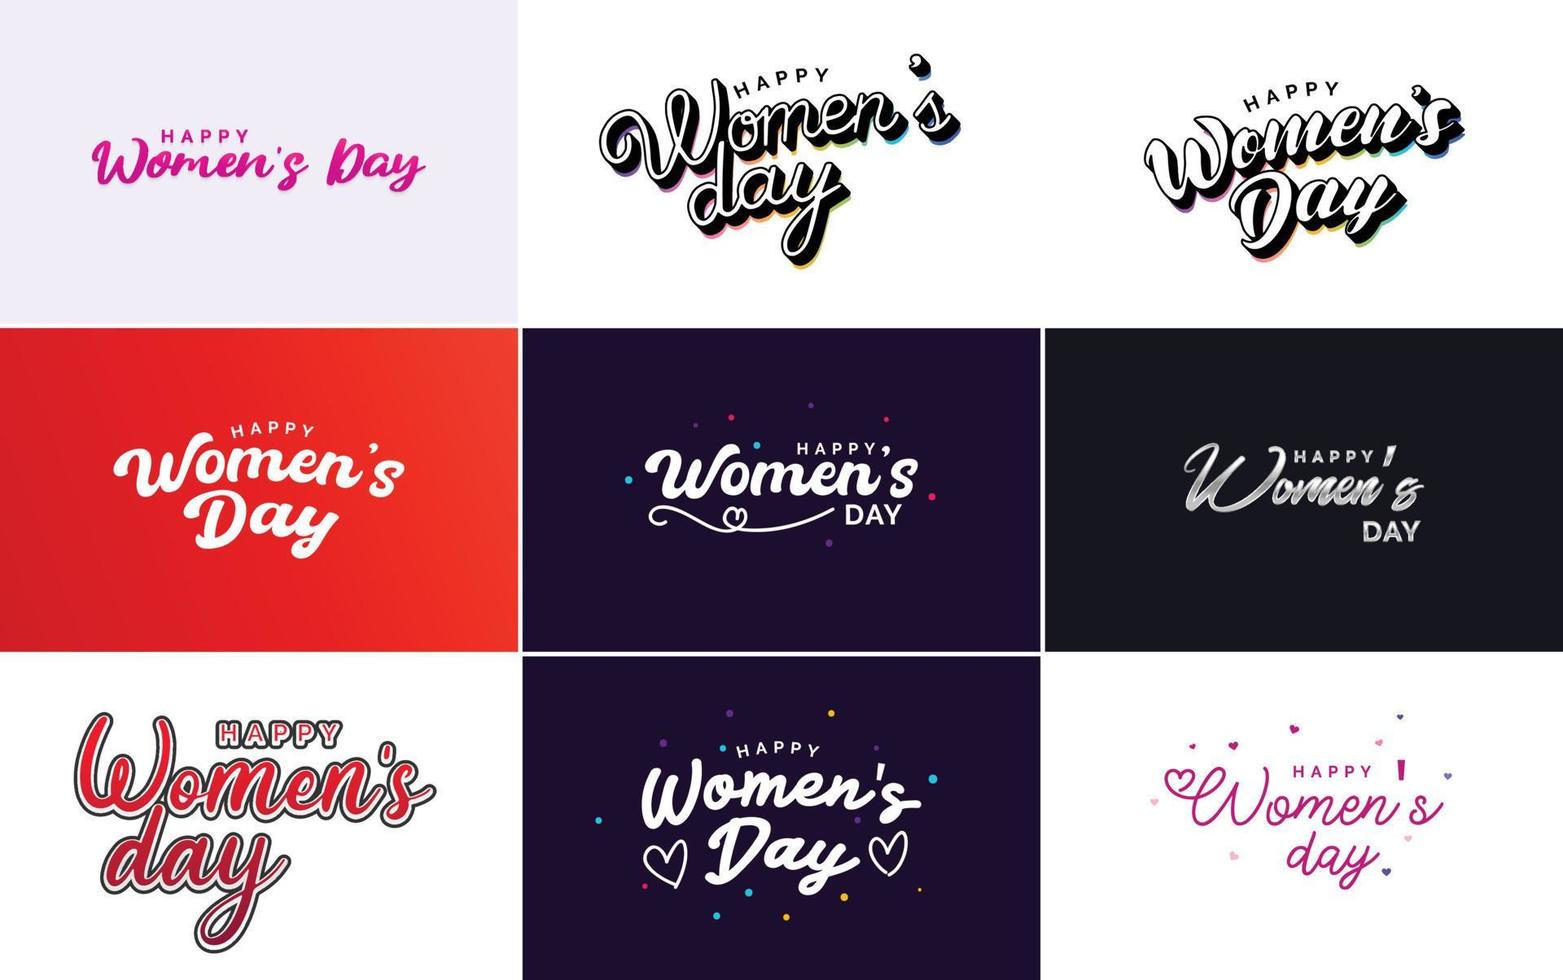 March 8th typographic design set with Happy Women's Day text vector